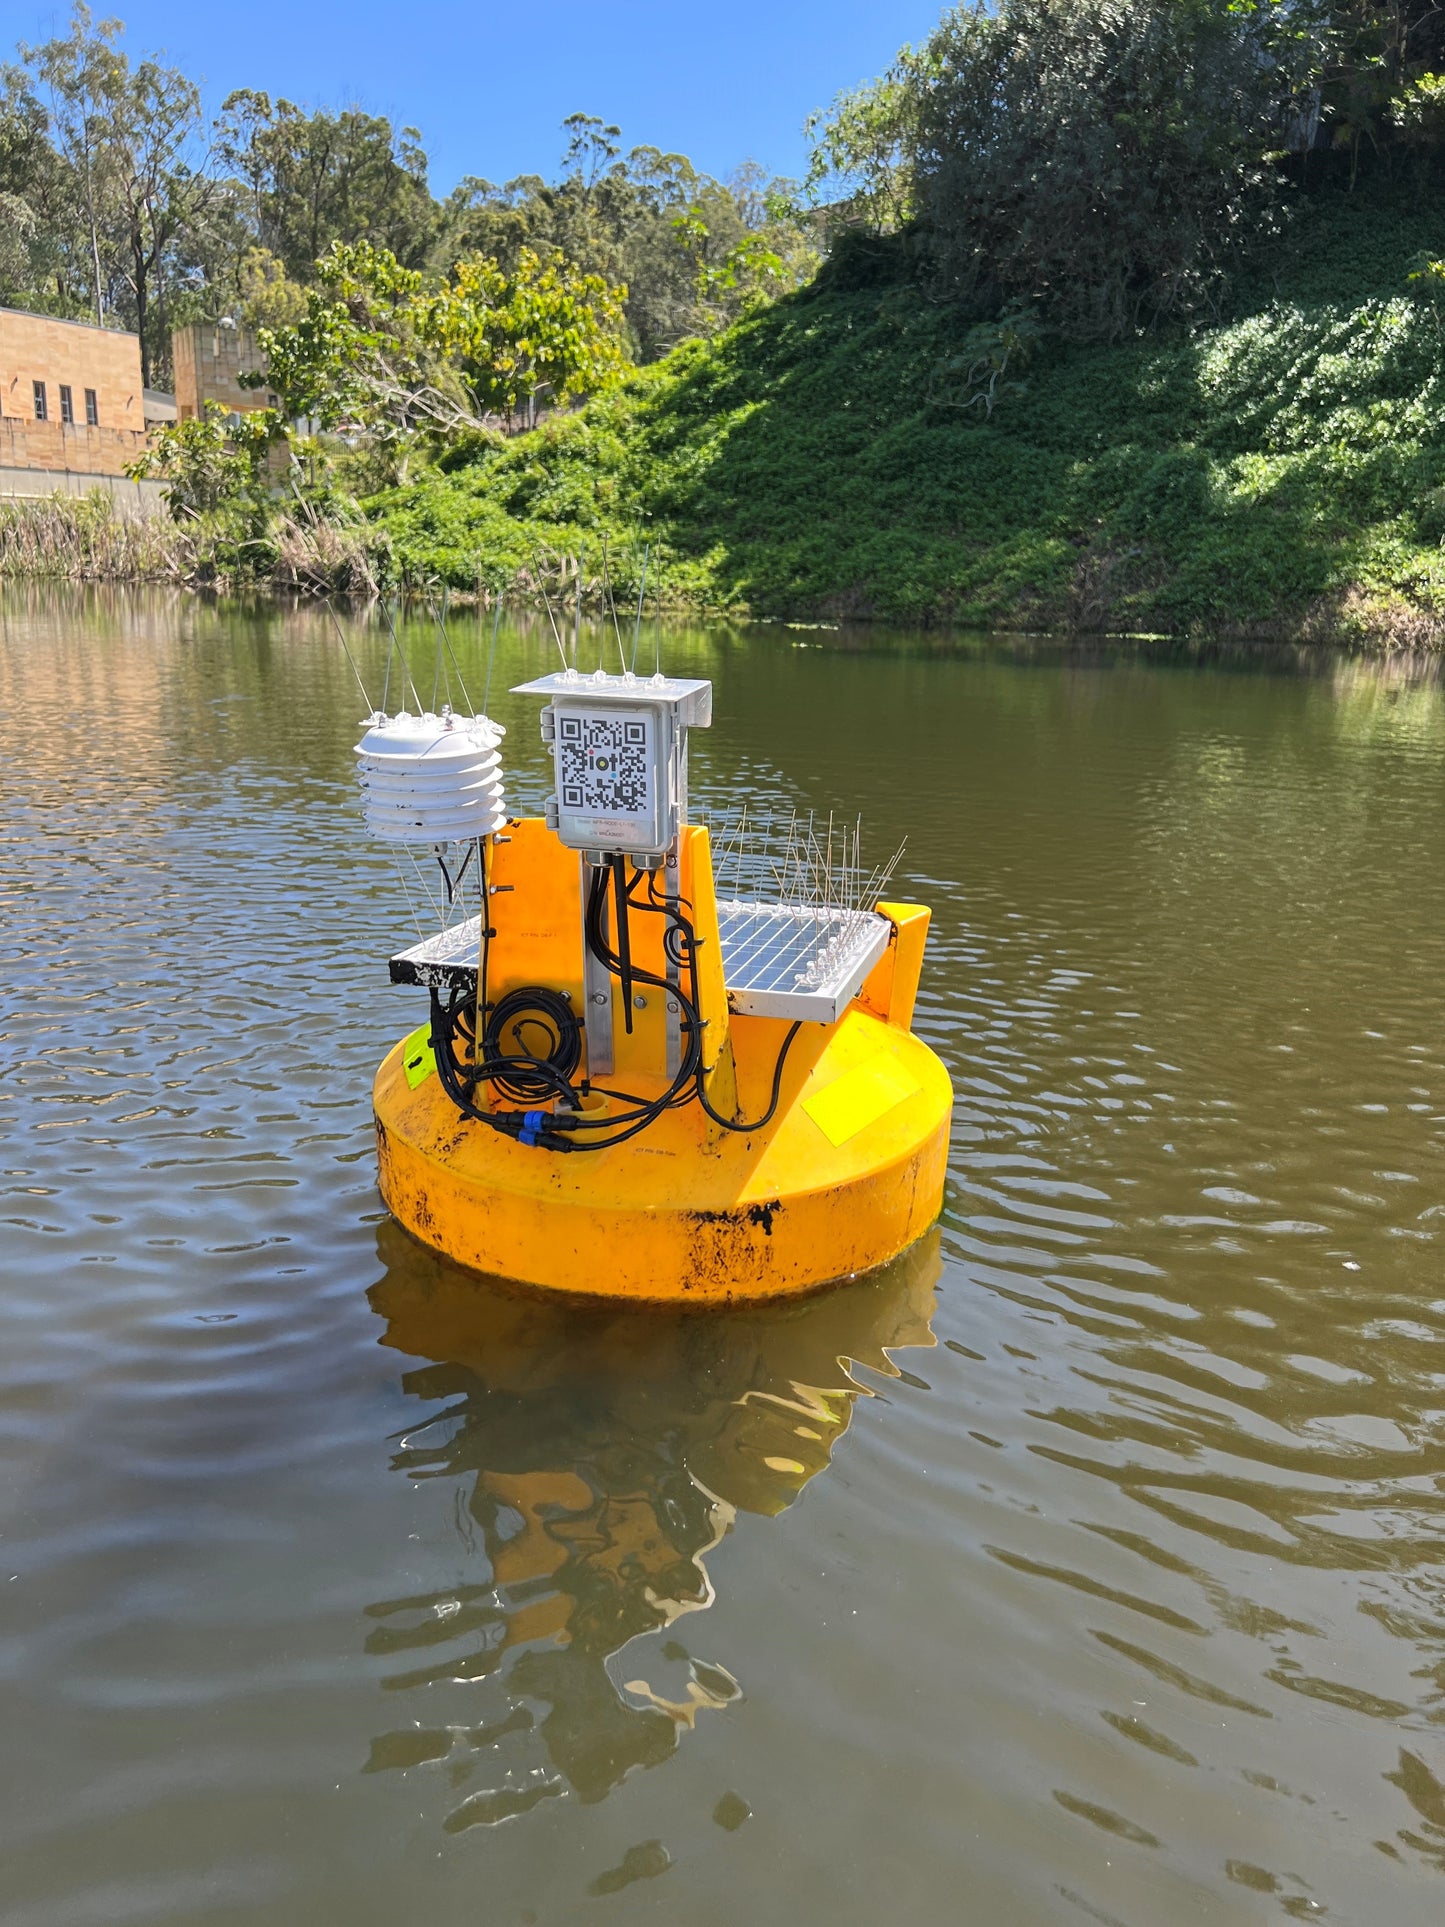 IoT Water Buoy for Water Quality Monitoring - 12 months managed services